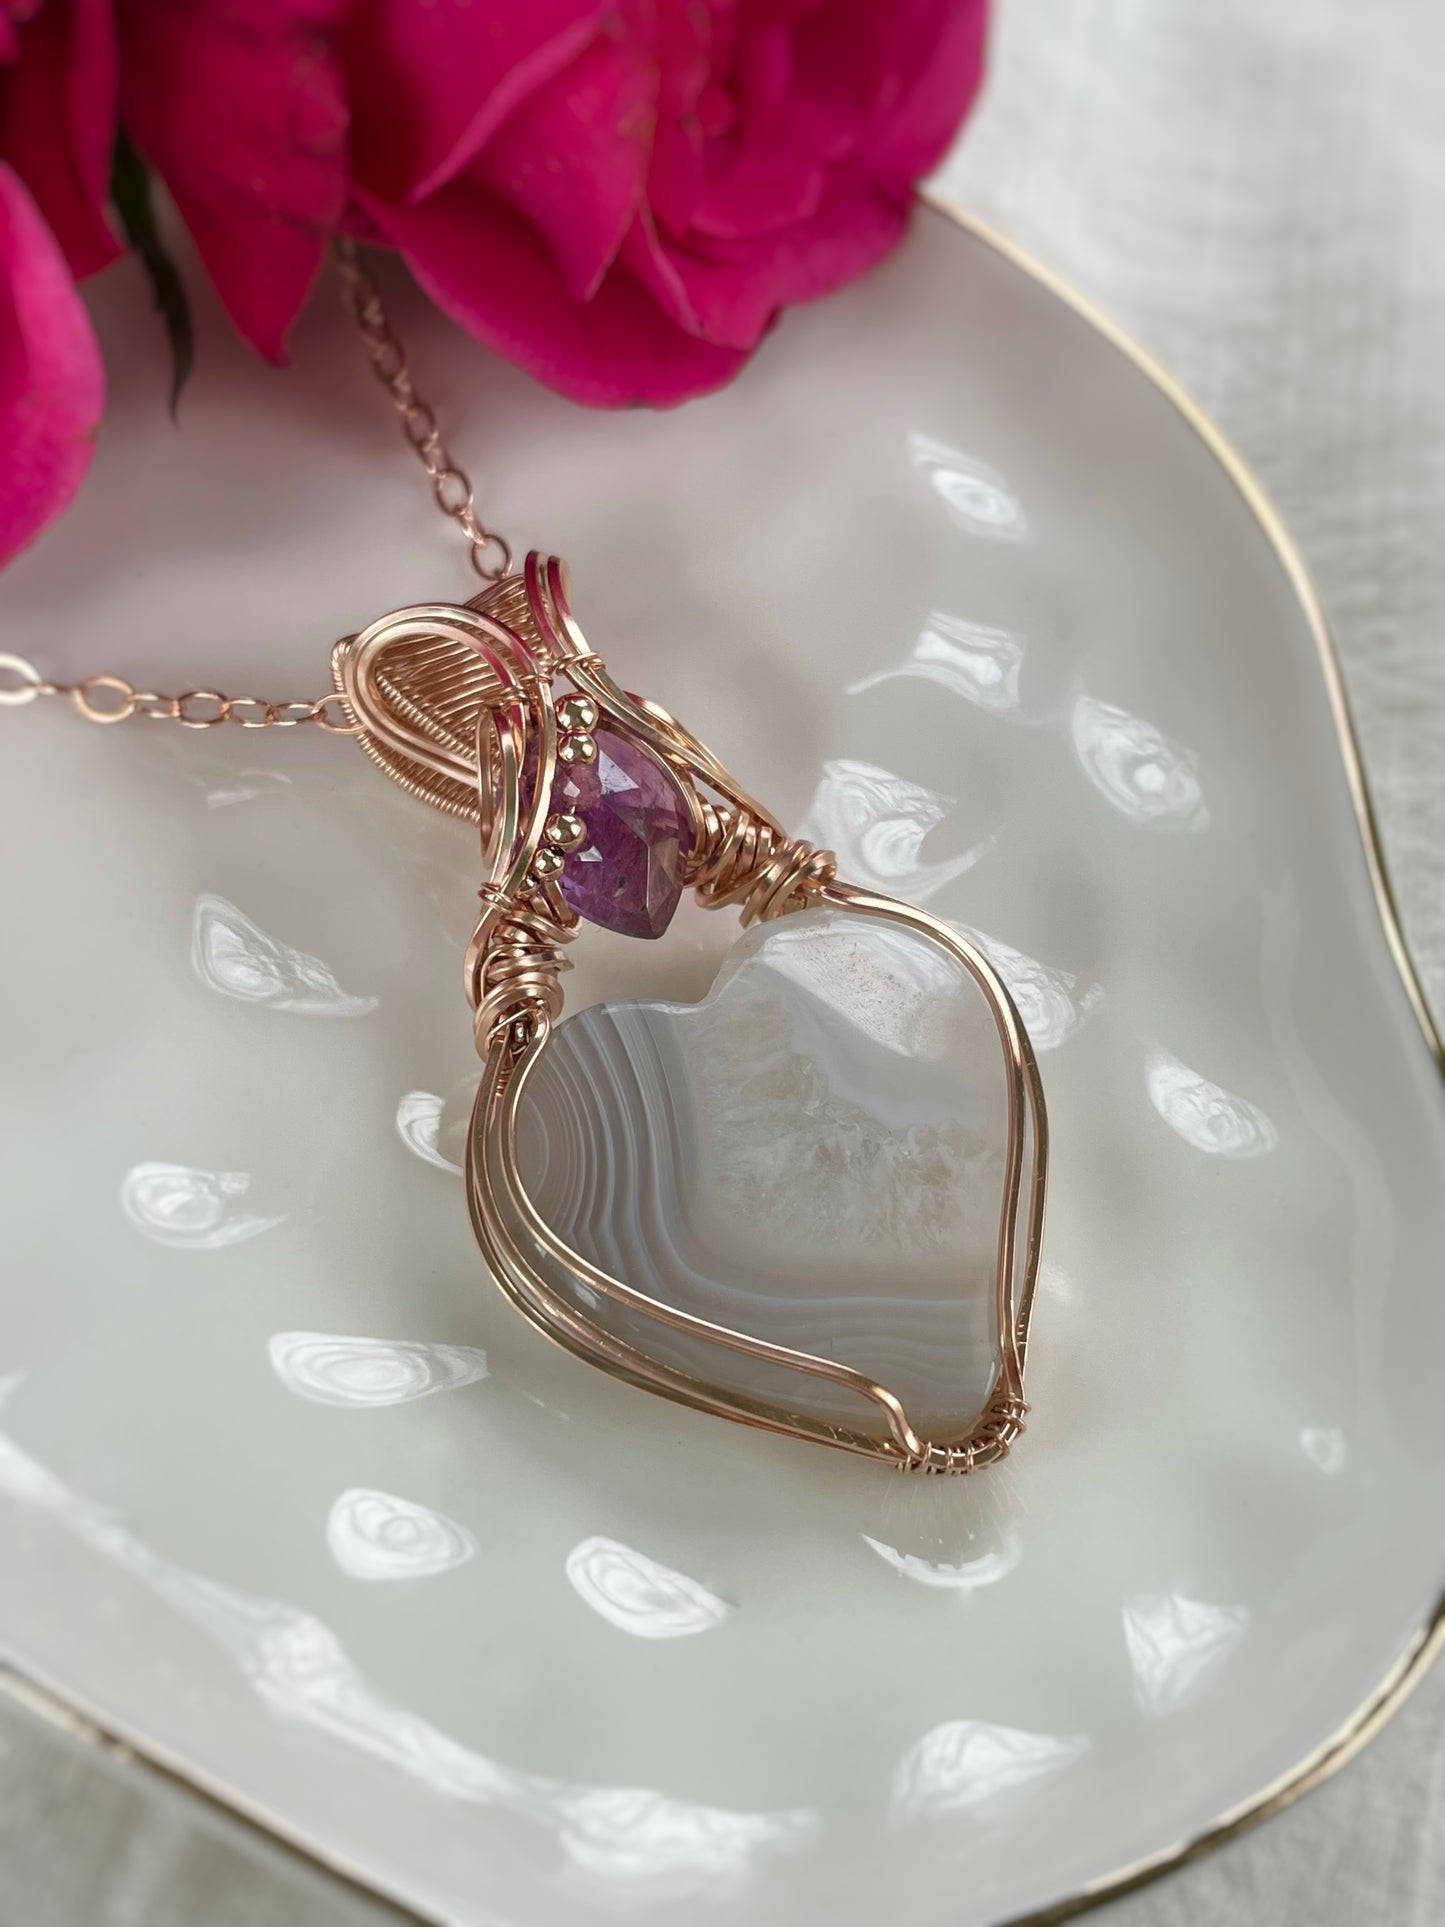 Botswana Agate Heart, Amethyst & Pink Tourmaline Necklace in 14k Rose Gold Filled